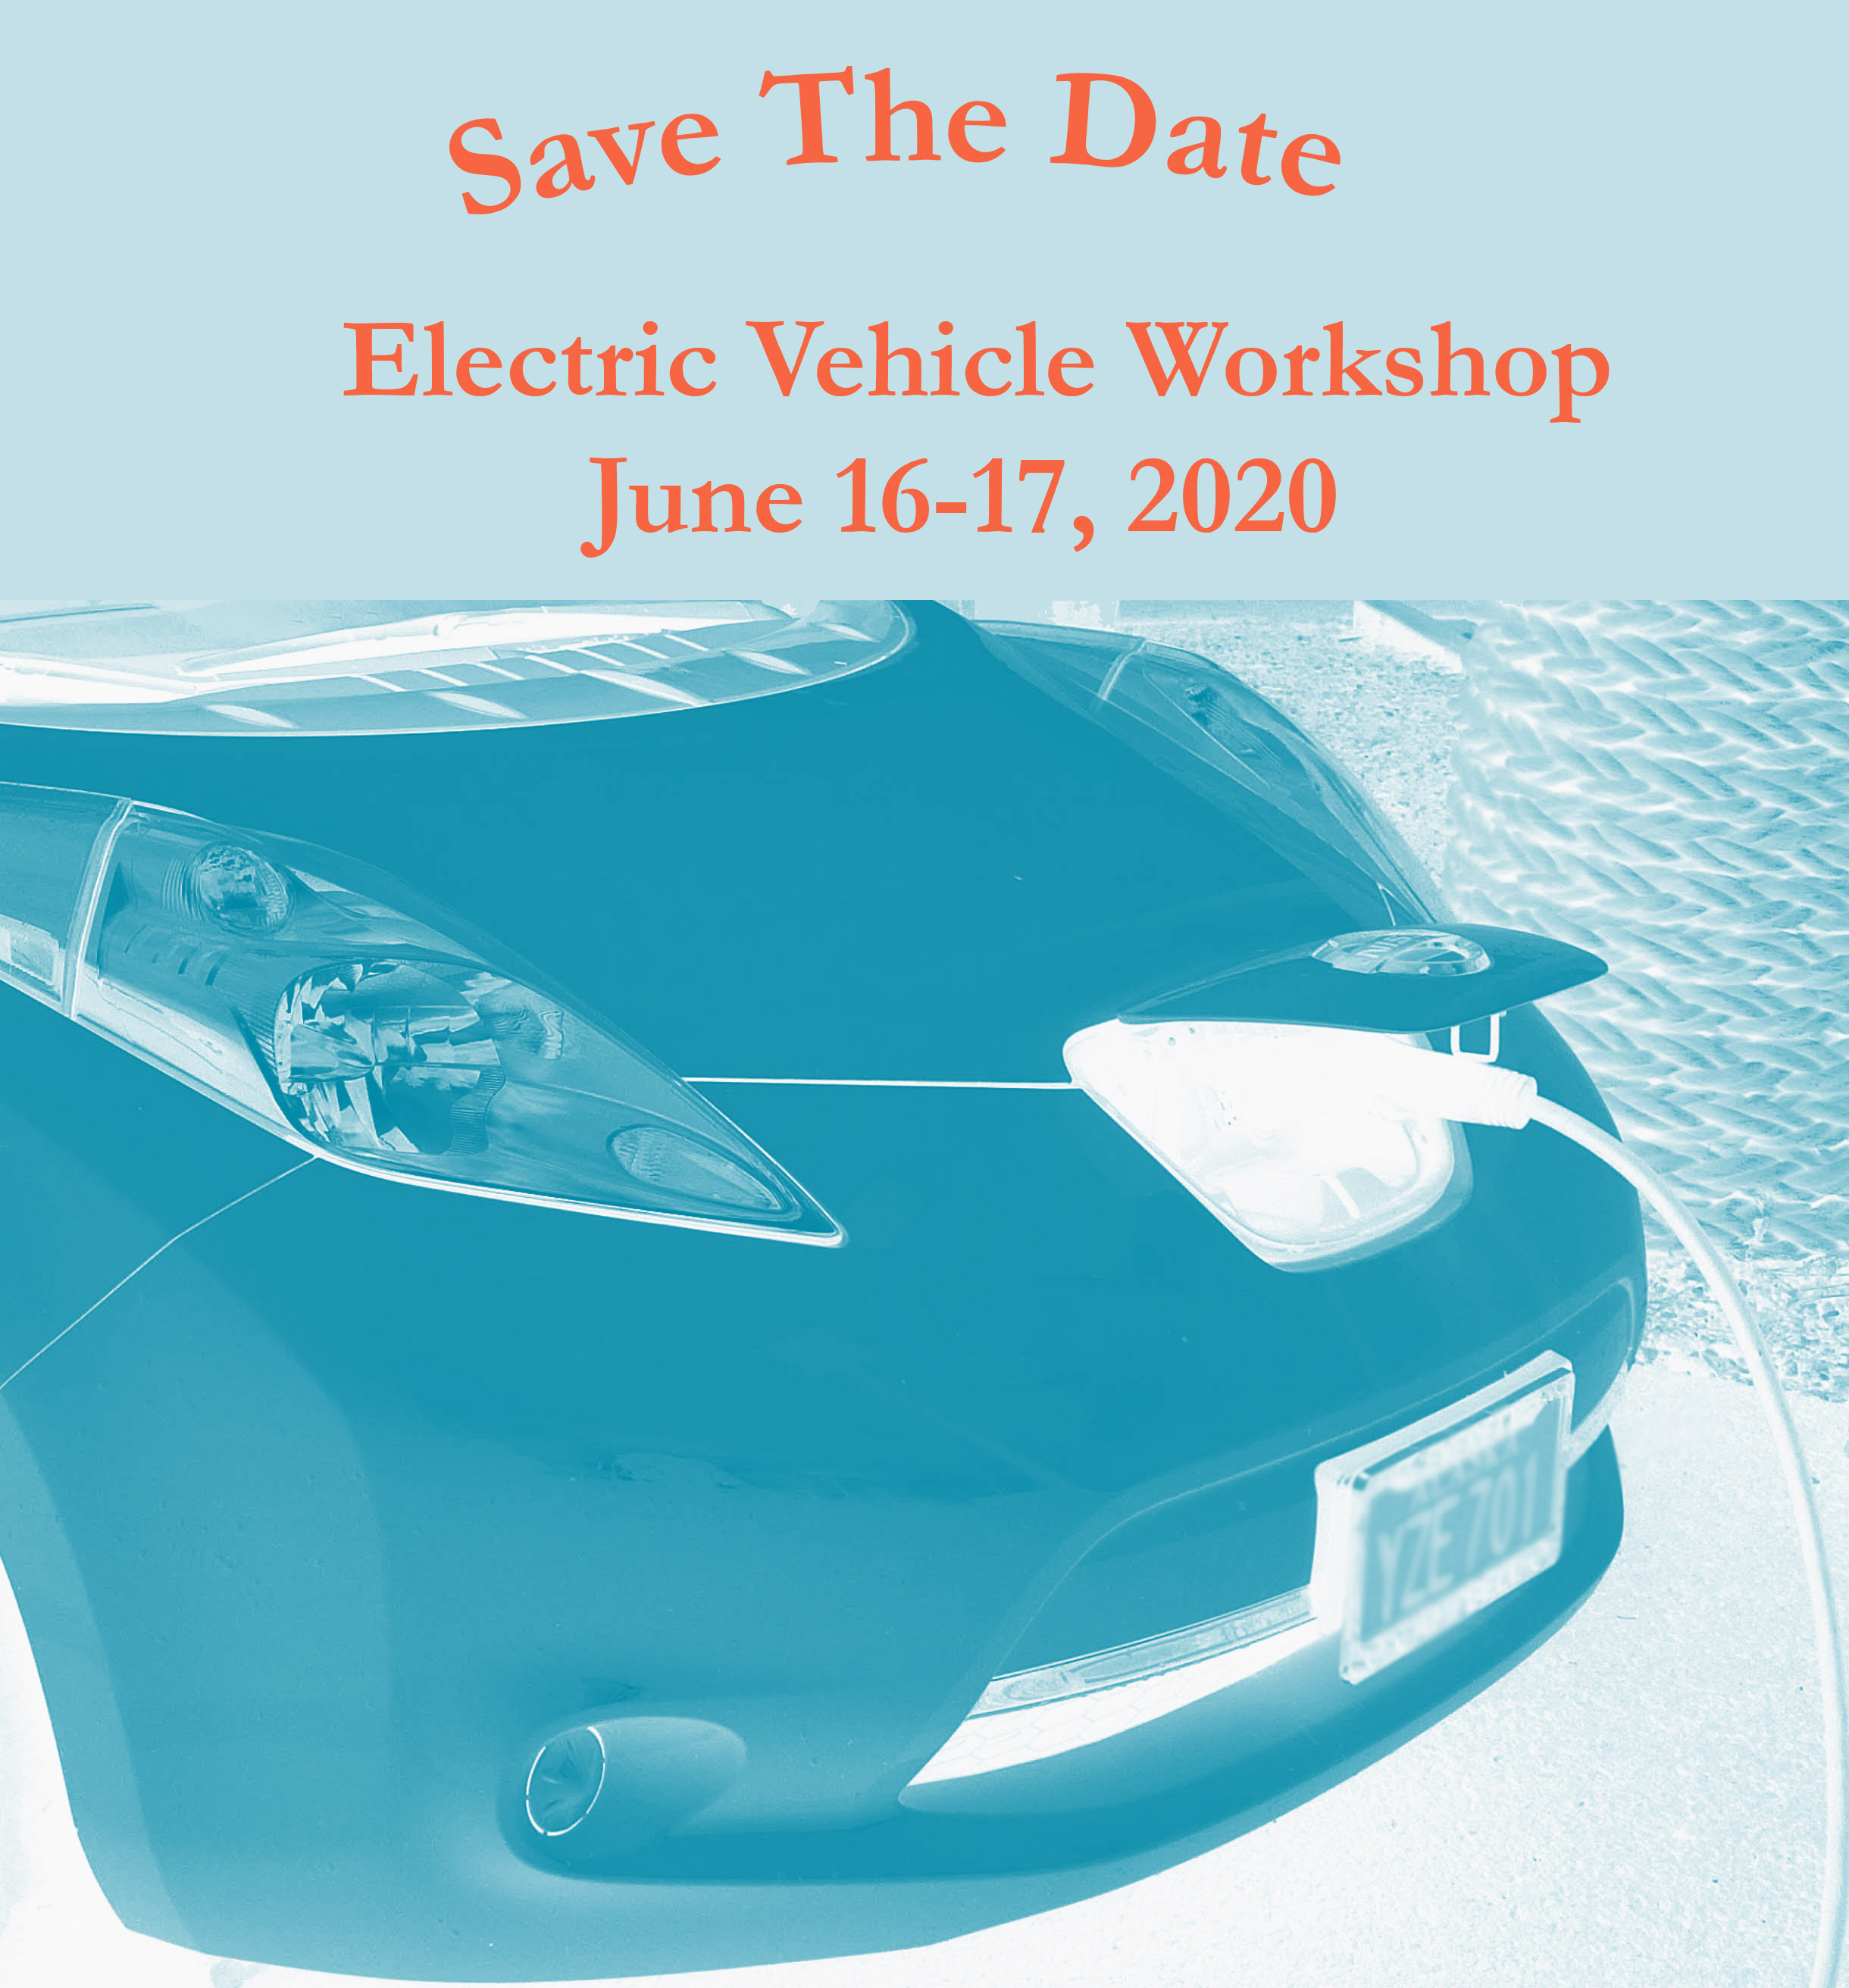 Interested in Electric Vehicles? Save the Date!